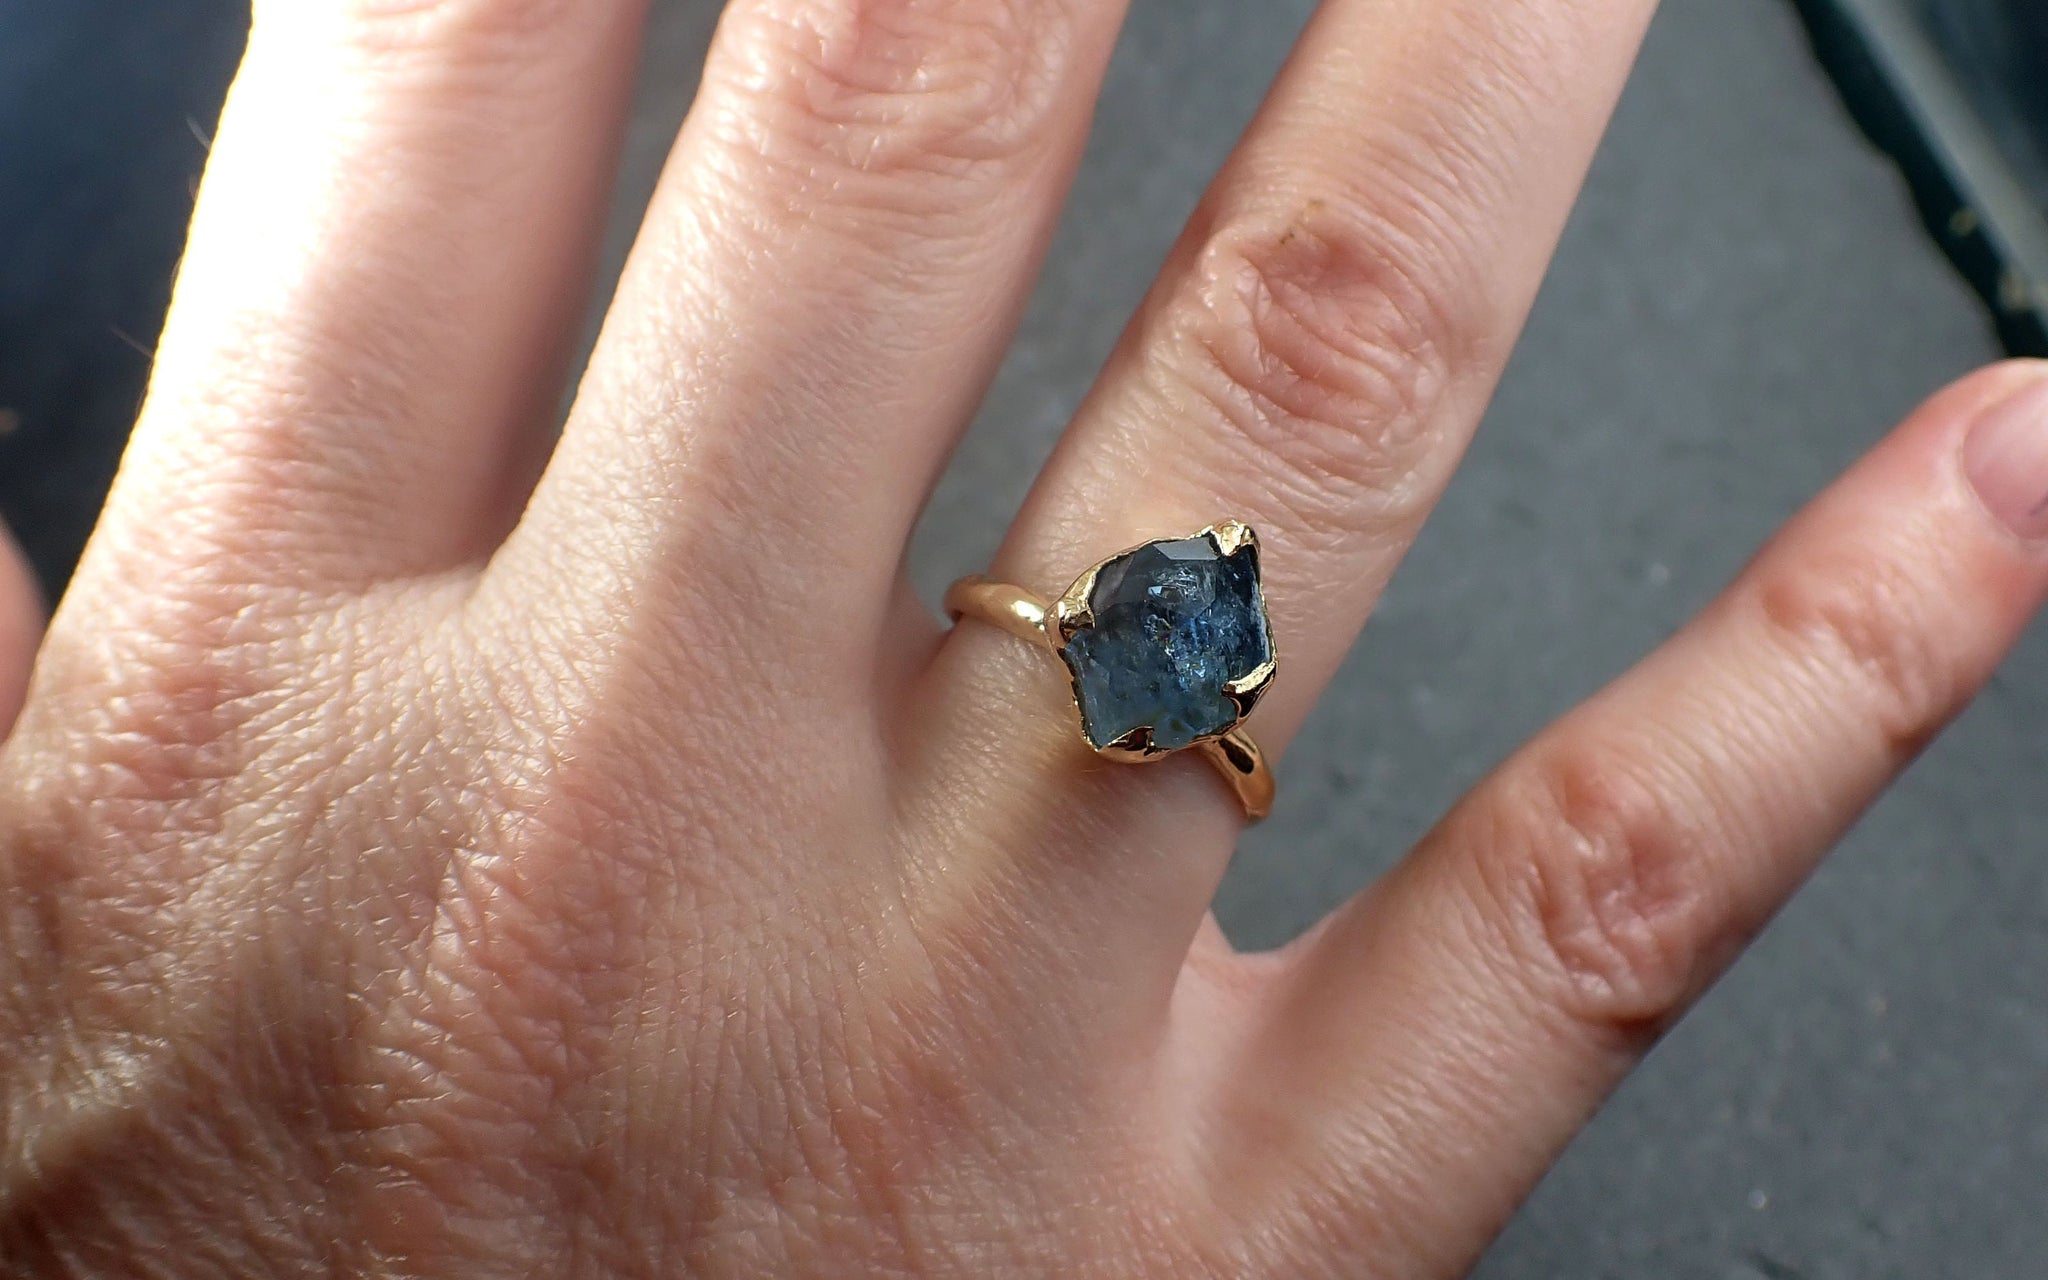 Partially faceted Aquamarine Solitaire Ring 18k gold Custom One Of a Kind Gemstone Ring Bespoke byAngeline 2982